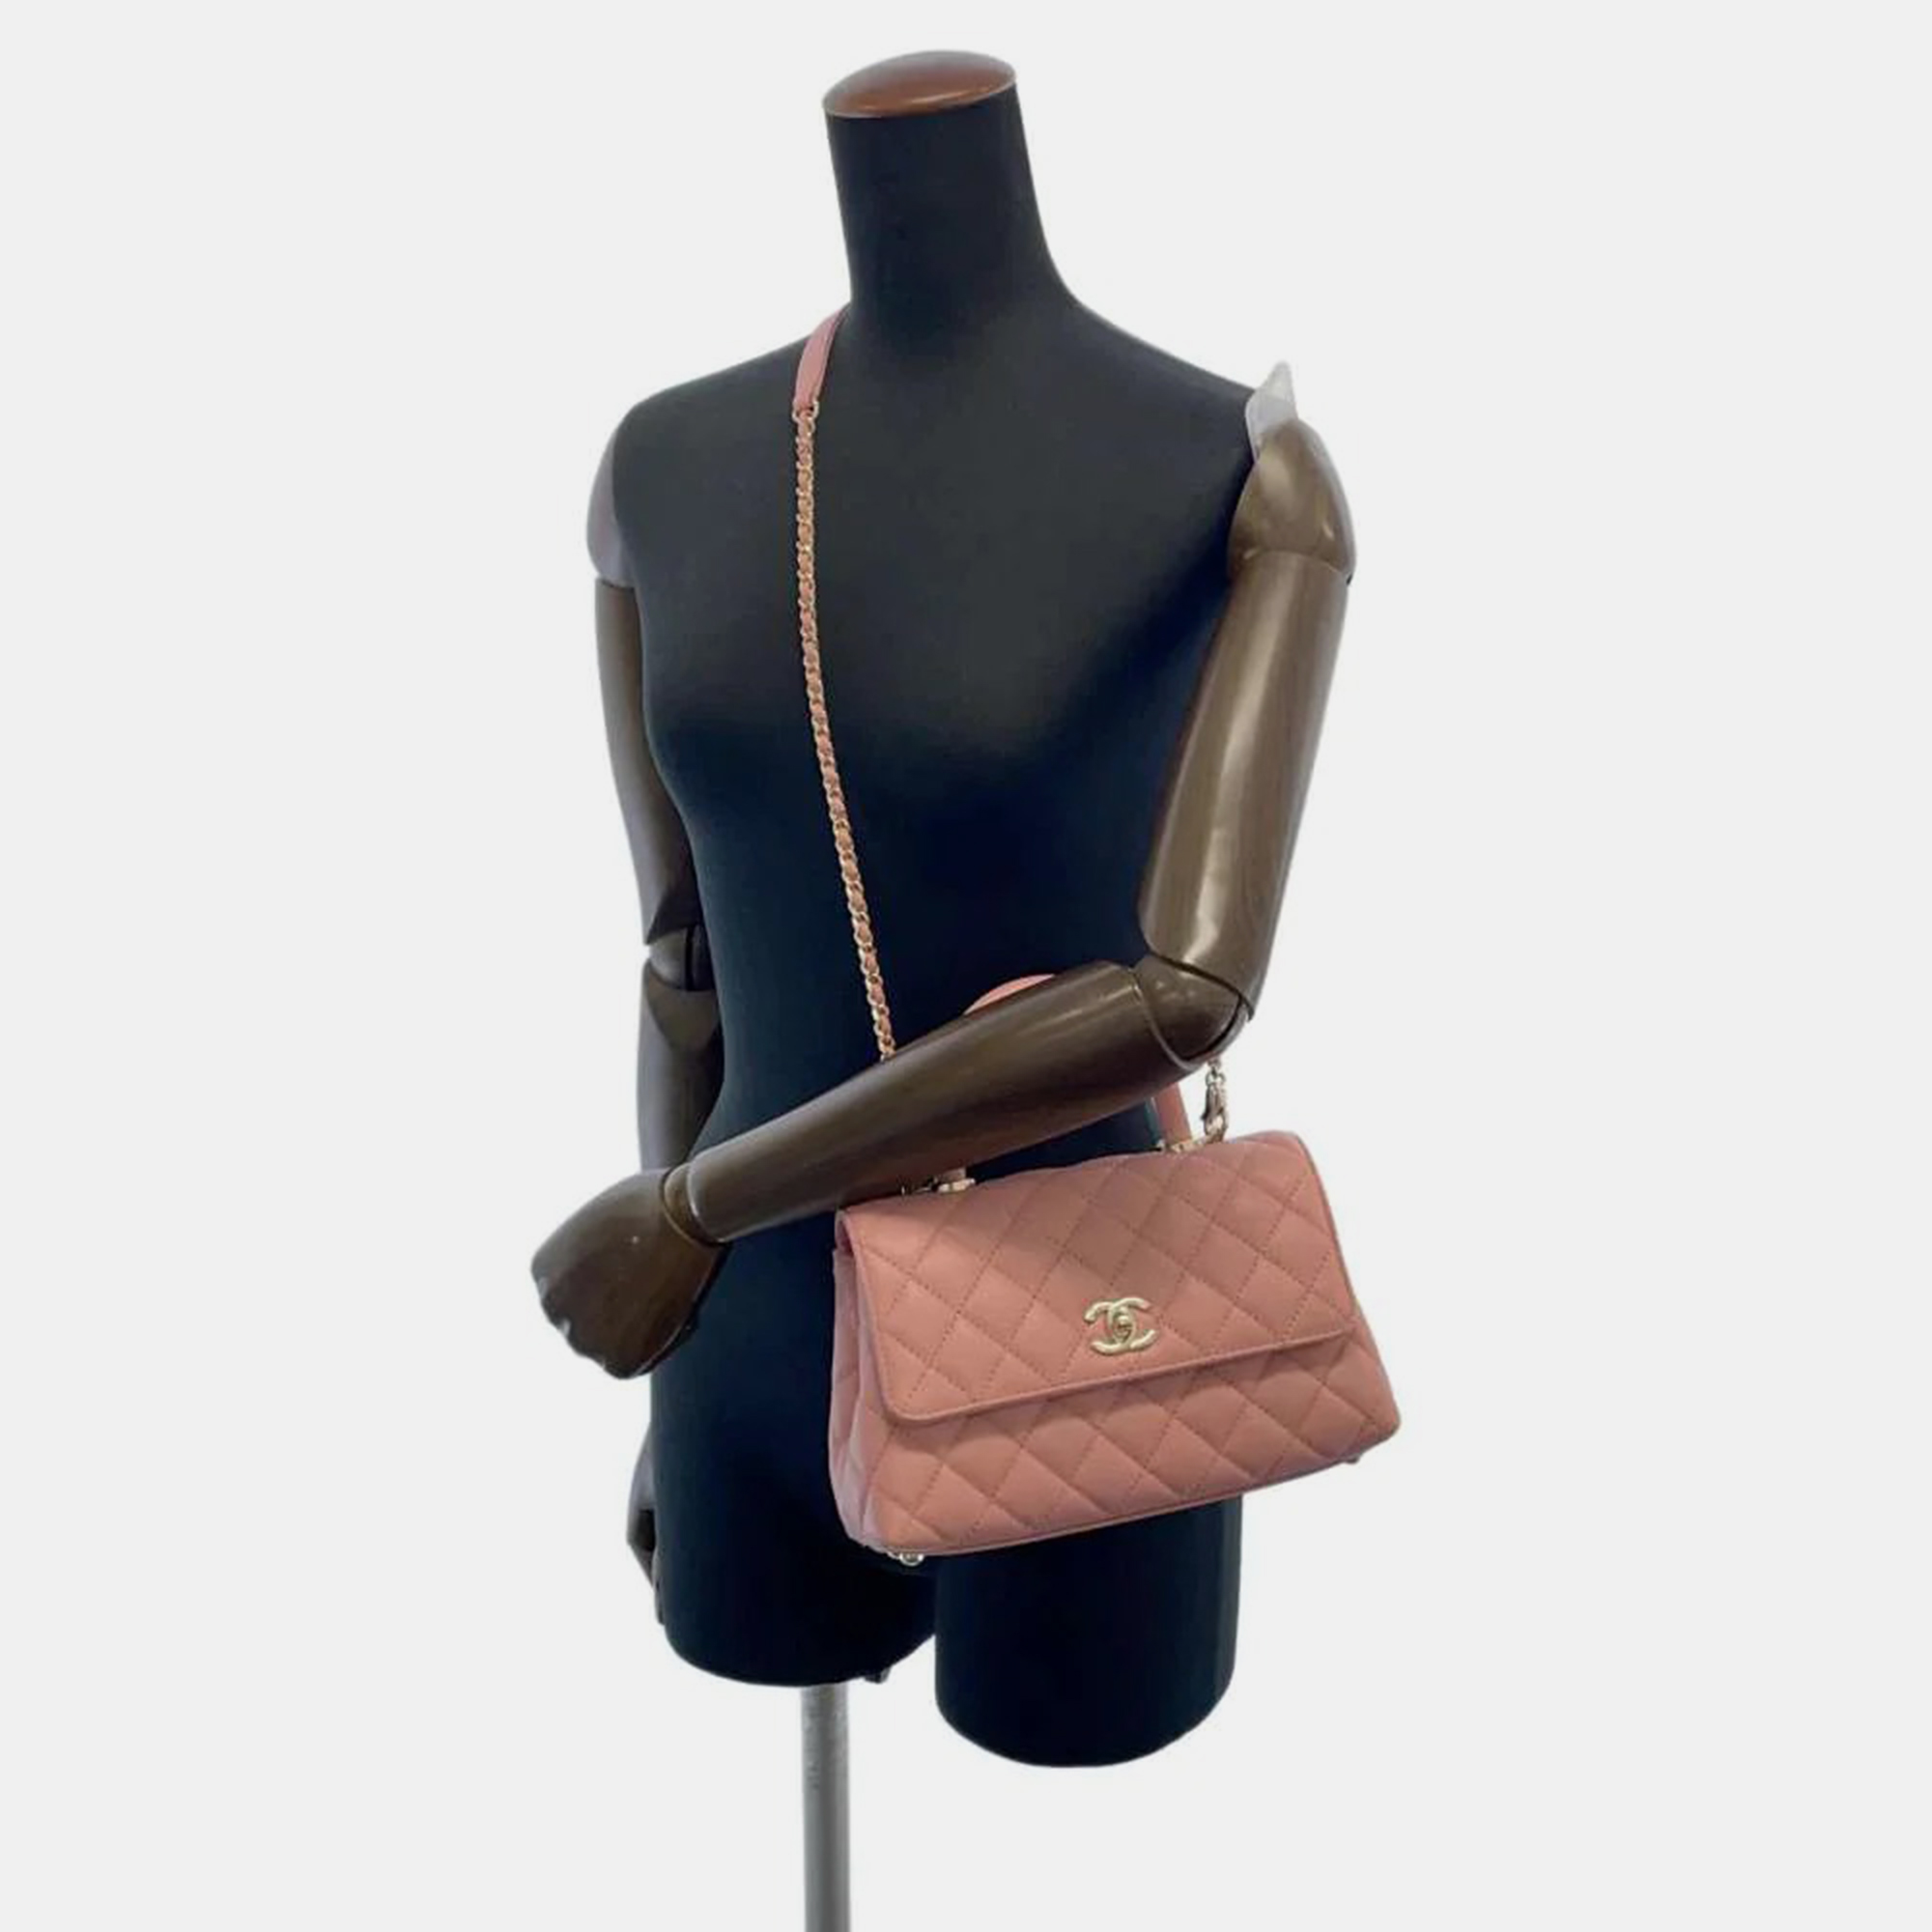 Chanel Pink Caviar Leather Coco Top Handle Bag